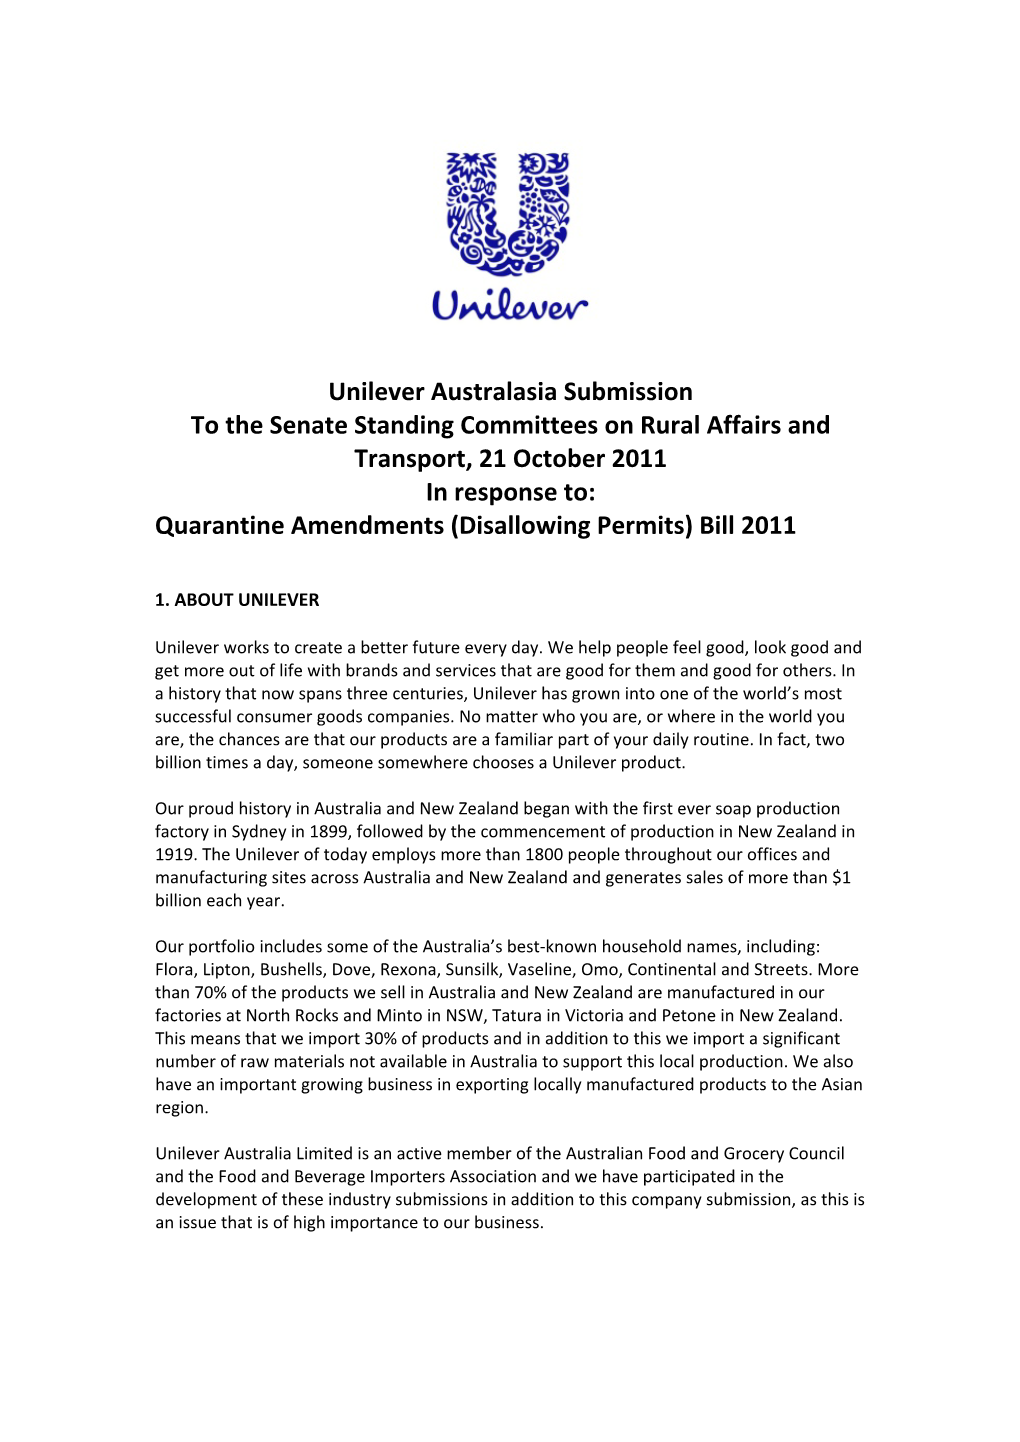 Unilever Australasia Submission to the Senate Standing Committees